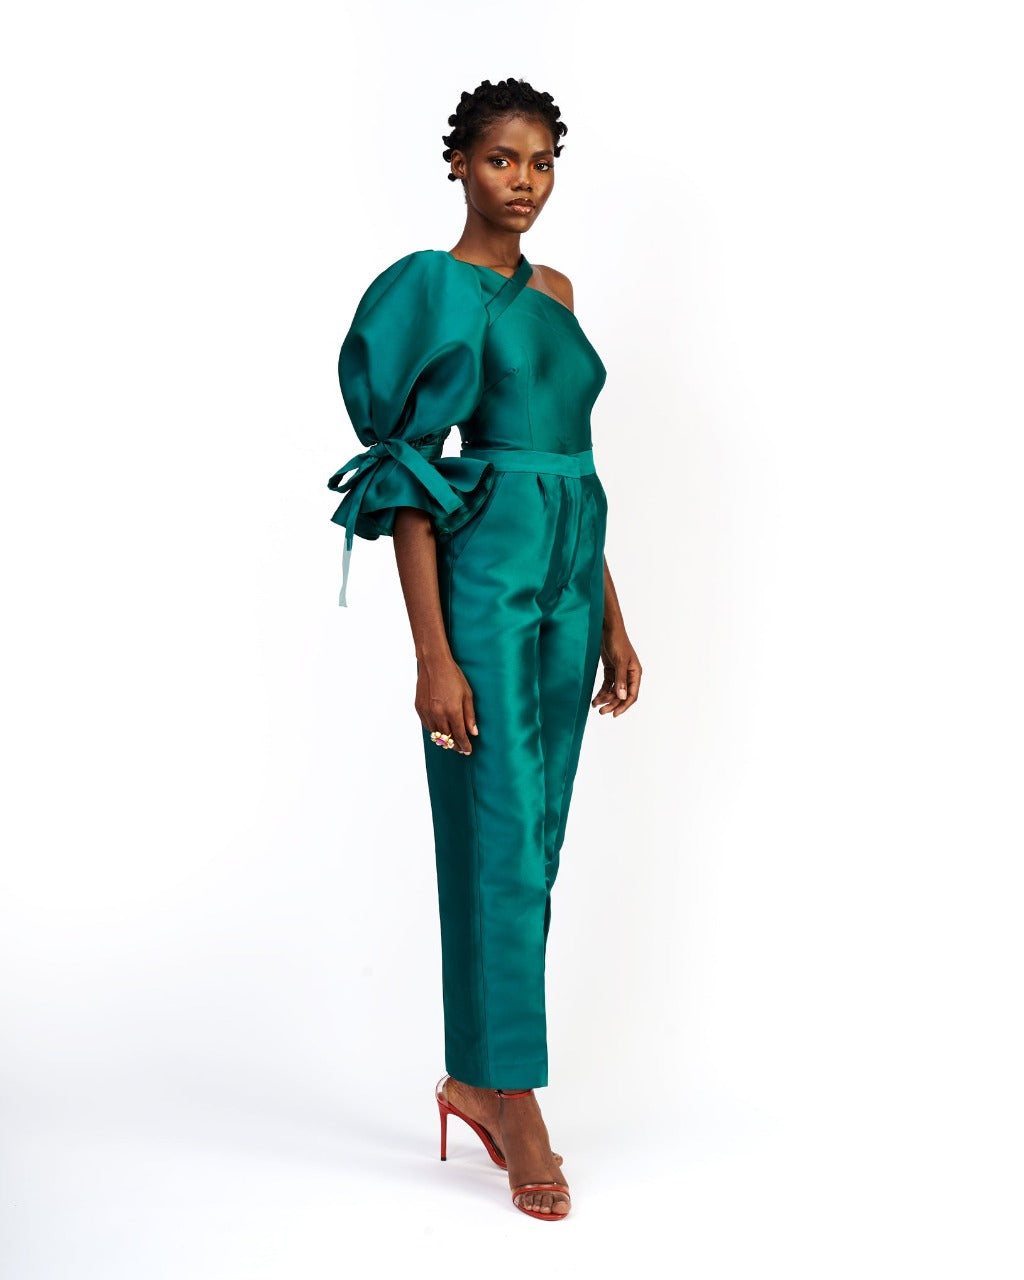 A model wearing a silk satin green top and pants